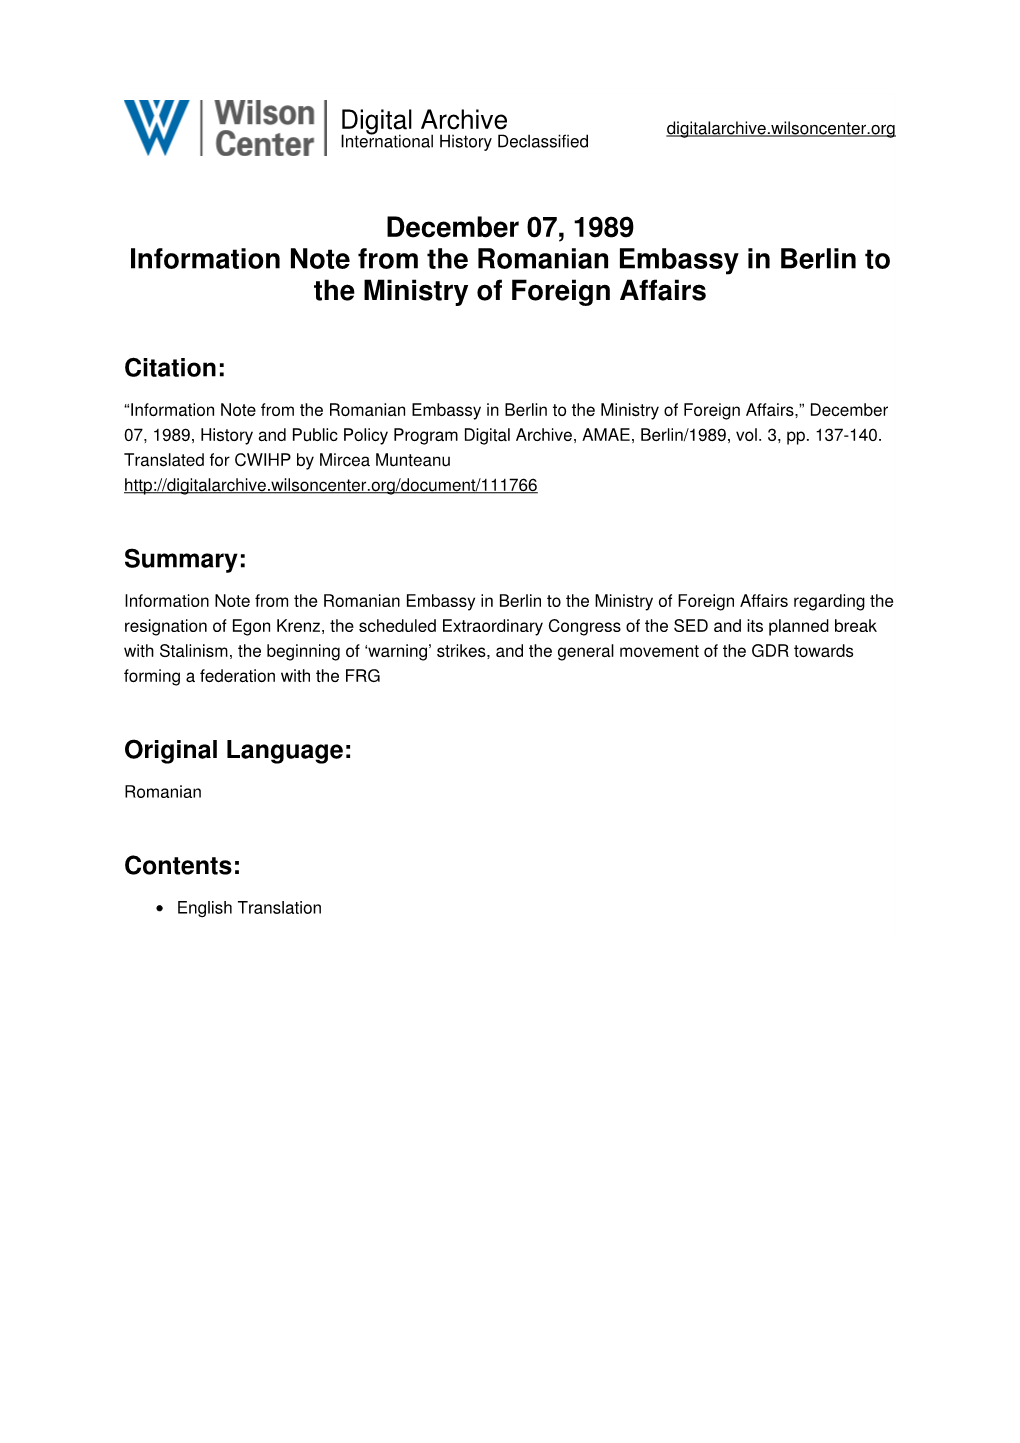 December 07, 1989 Information Note from the Romanian Embassy in Berlin to the Ministry of Foreign Affairs